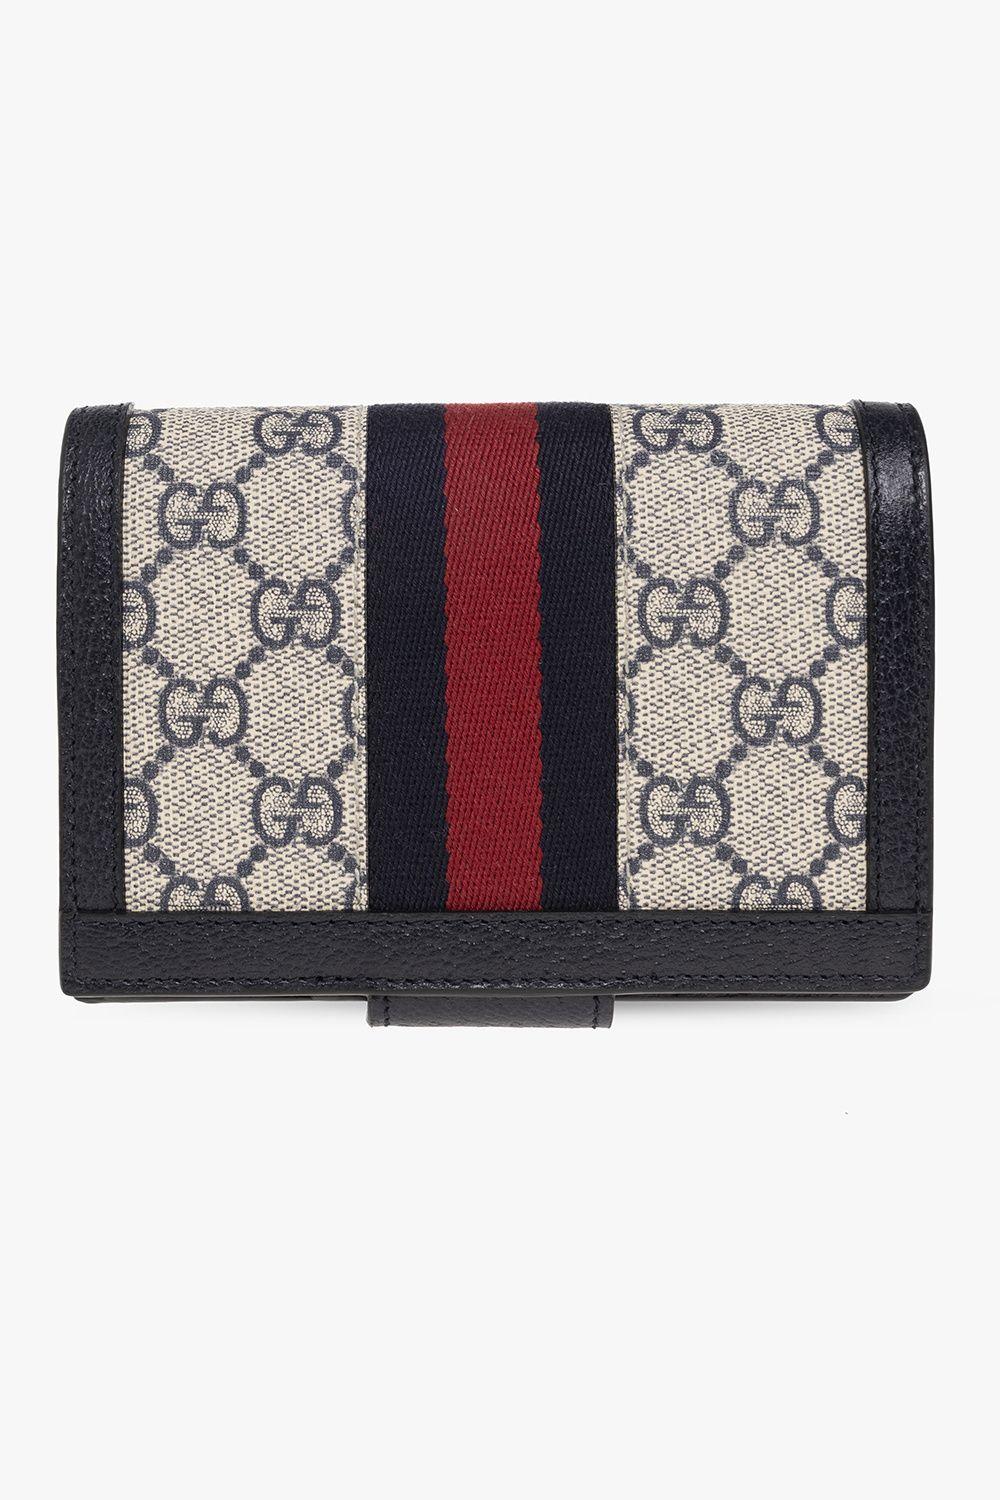 Gucci Wallet with Web stripe, Women's Accessories